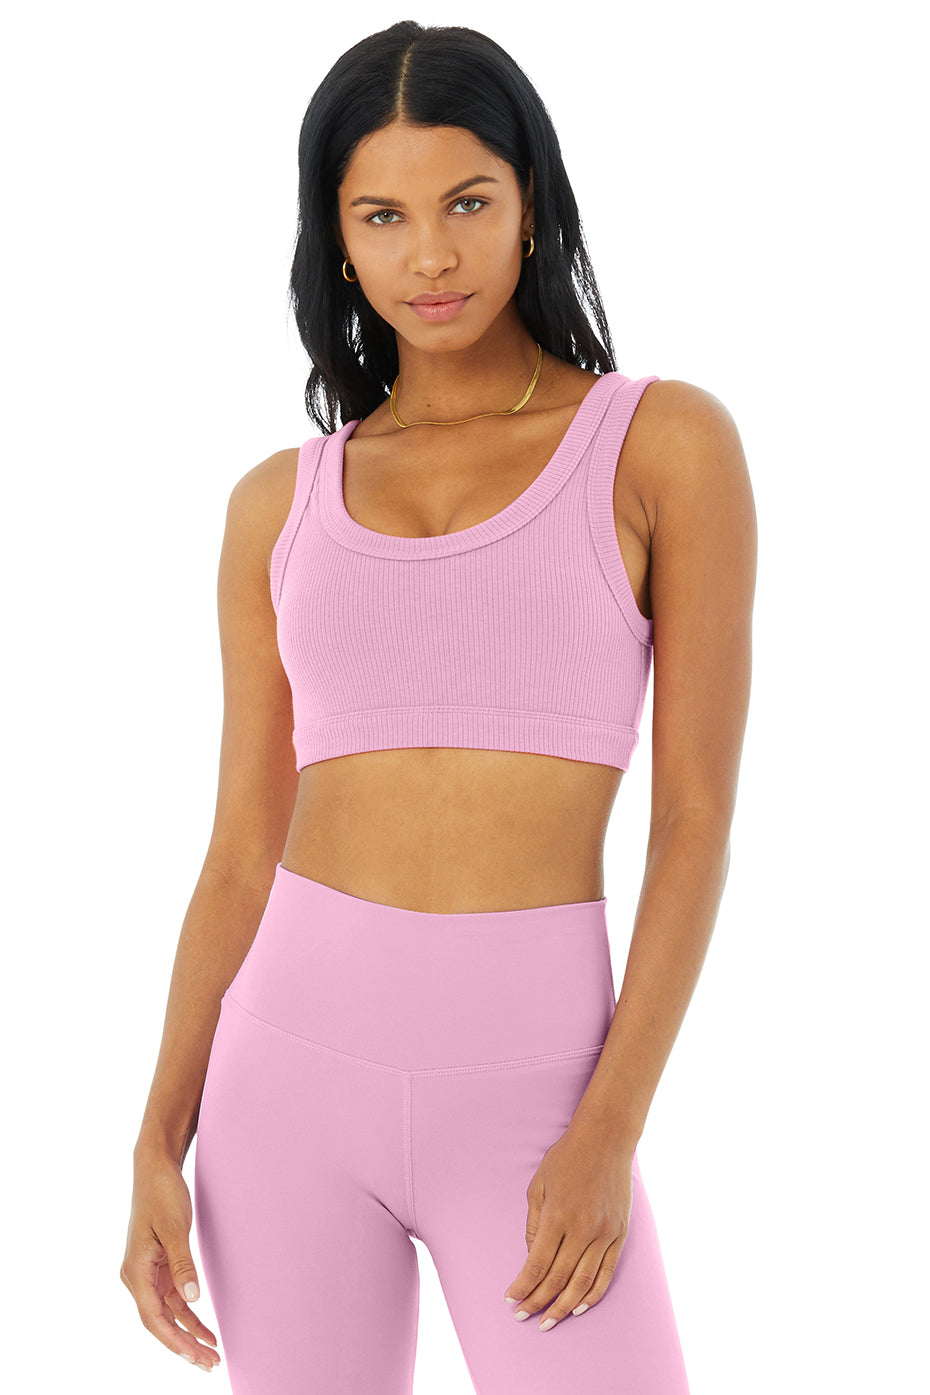 Wellness Bra in Pink Lavender by Alo Yoga - Work Well Daily